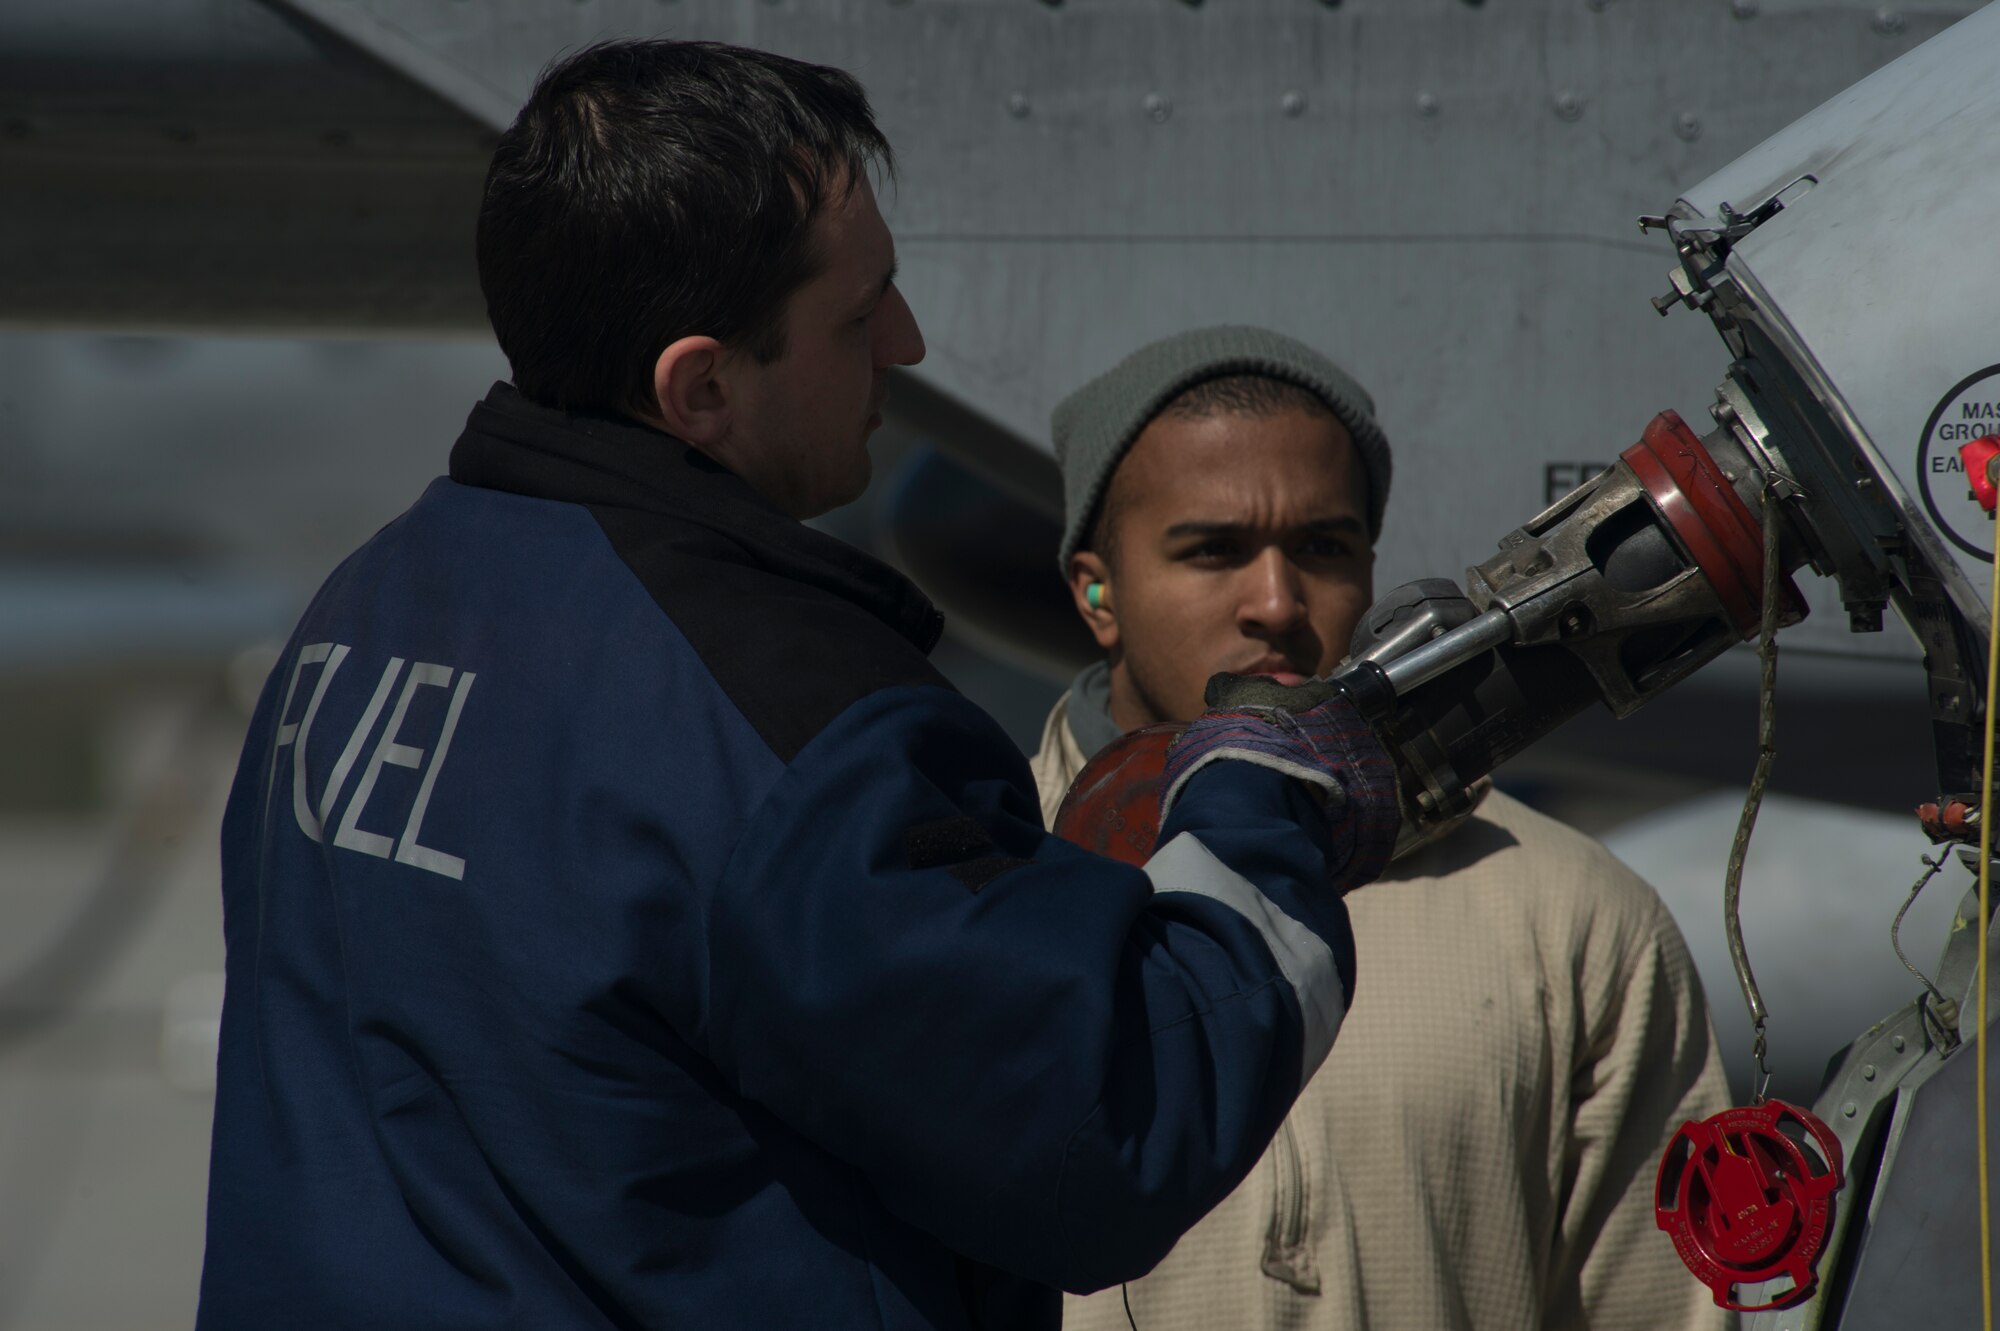 A 354th Expeditionary Fighter Squadron Airmen assists a Czech Republic air force member to refuel a U.S. Air Force A-10 Thunderbolt II attack aircraft during a theater security package deployment to Namest Air Base, Czech Republic, April 9, 2015. TSP deployments and combined training like this demonstrate the shared commitment in promoting a peaceful and stable Europe. (U.S. Air Force photo by Staff Sgt. Christopher Ruano/Released)